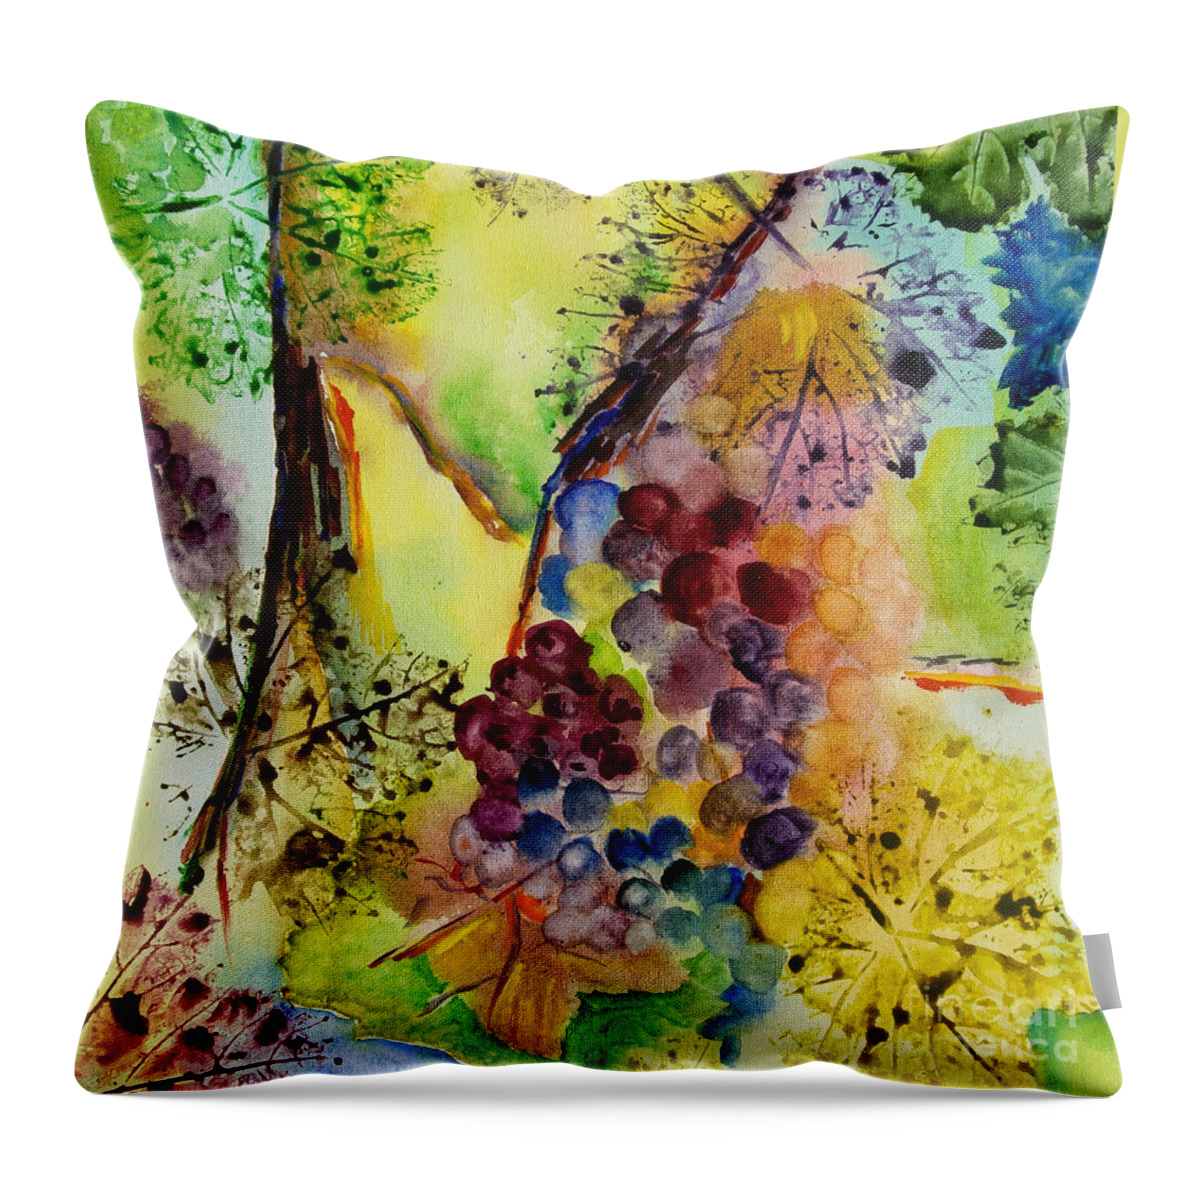 Watercolor Throw Pillow featuring the painting Grapes and Leaves III by Karen Fleschler